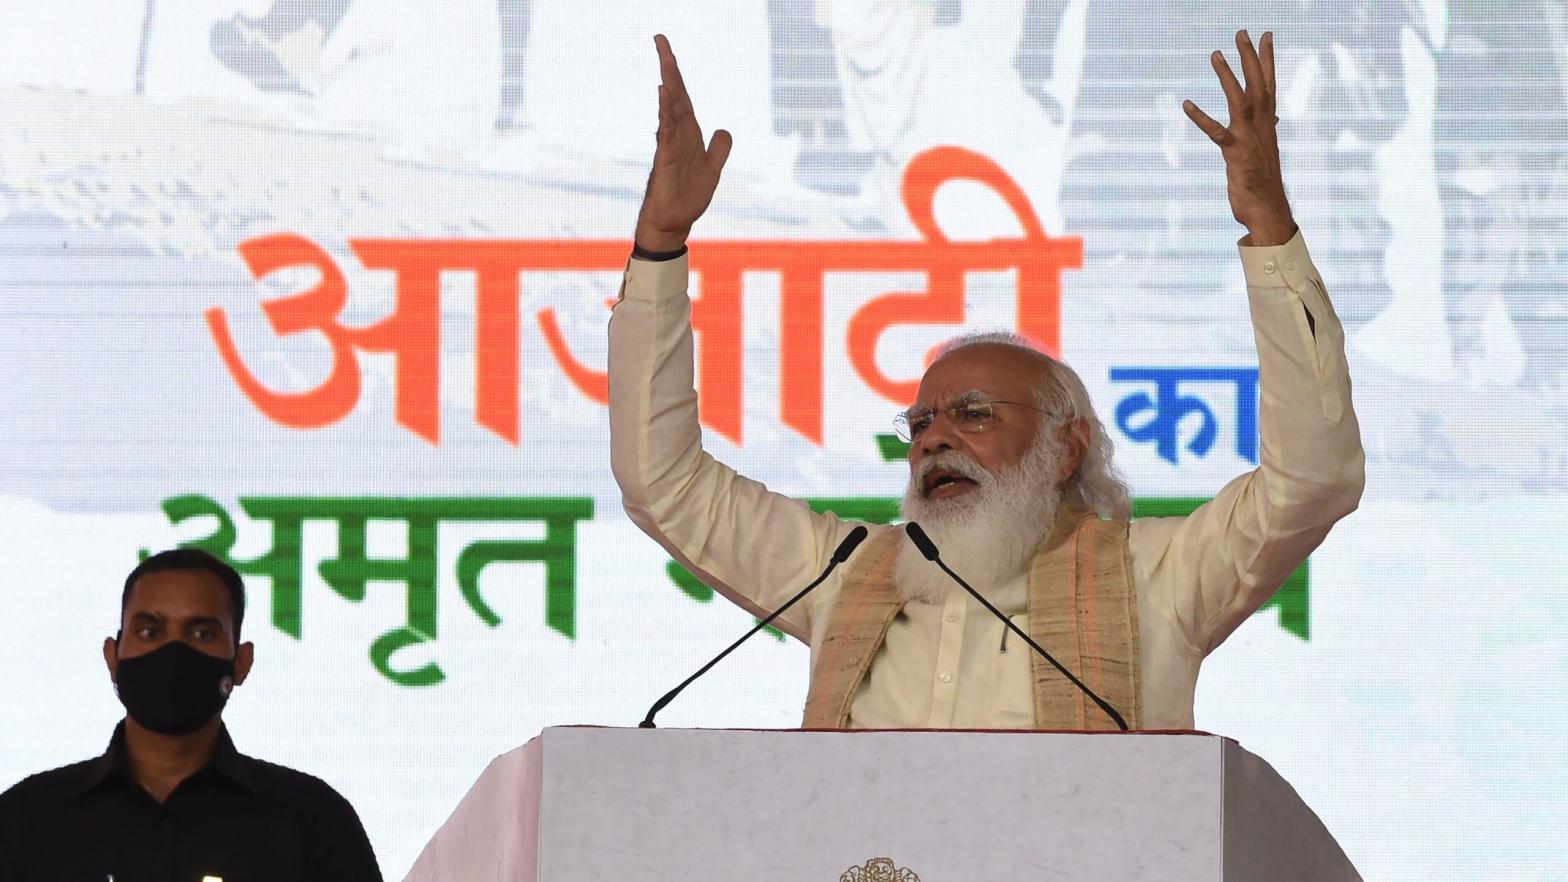 India's Prime Minister Narendra Modi addresses a gathering to mark the country's 75th year of independence, in Ahmedabad on March 12, 2021. (Photo: Sam Panthaky/AFP, Getty Images)